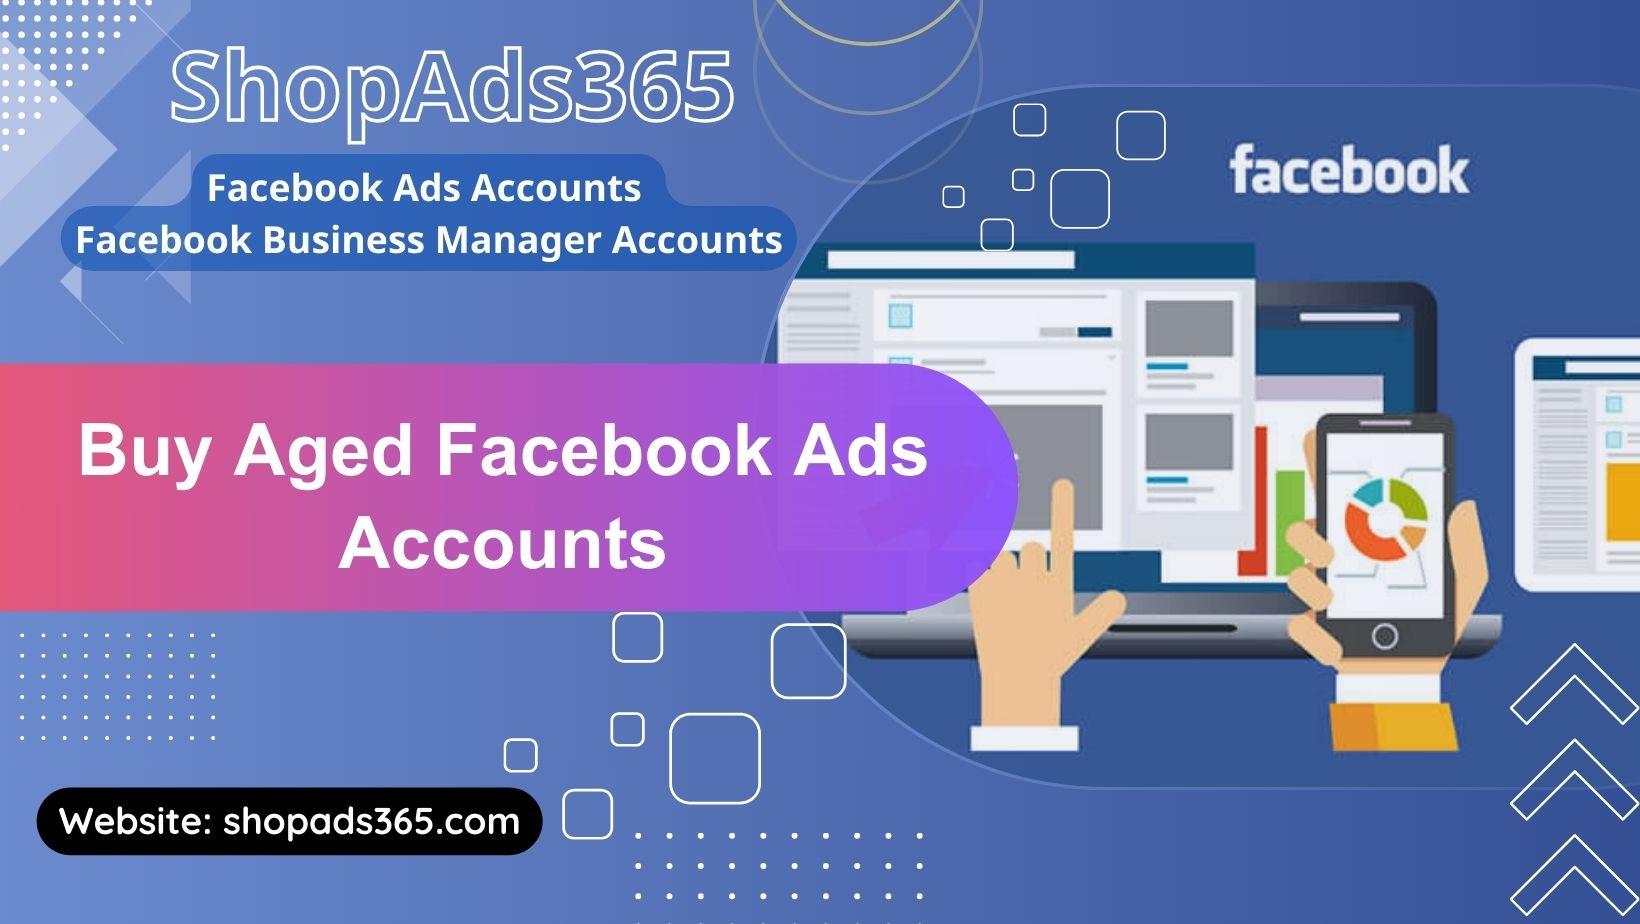 Buy Aged Facebook Ads Accounts Advantages, Risks, and Best Practices